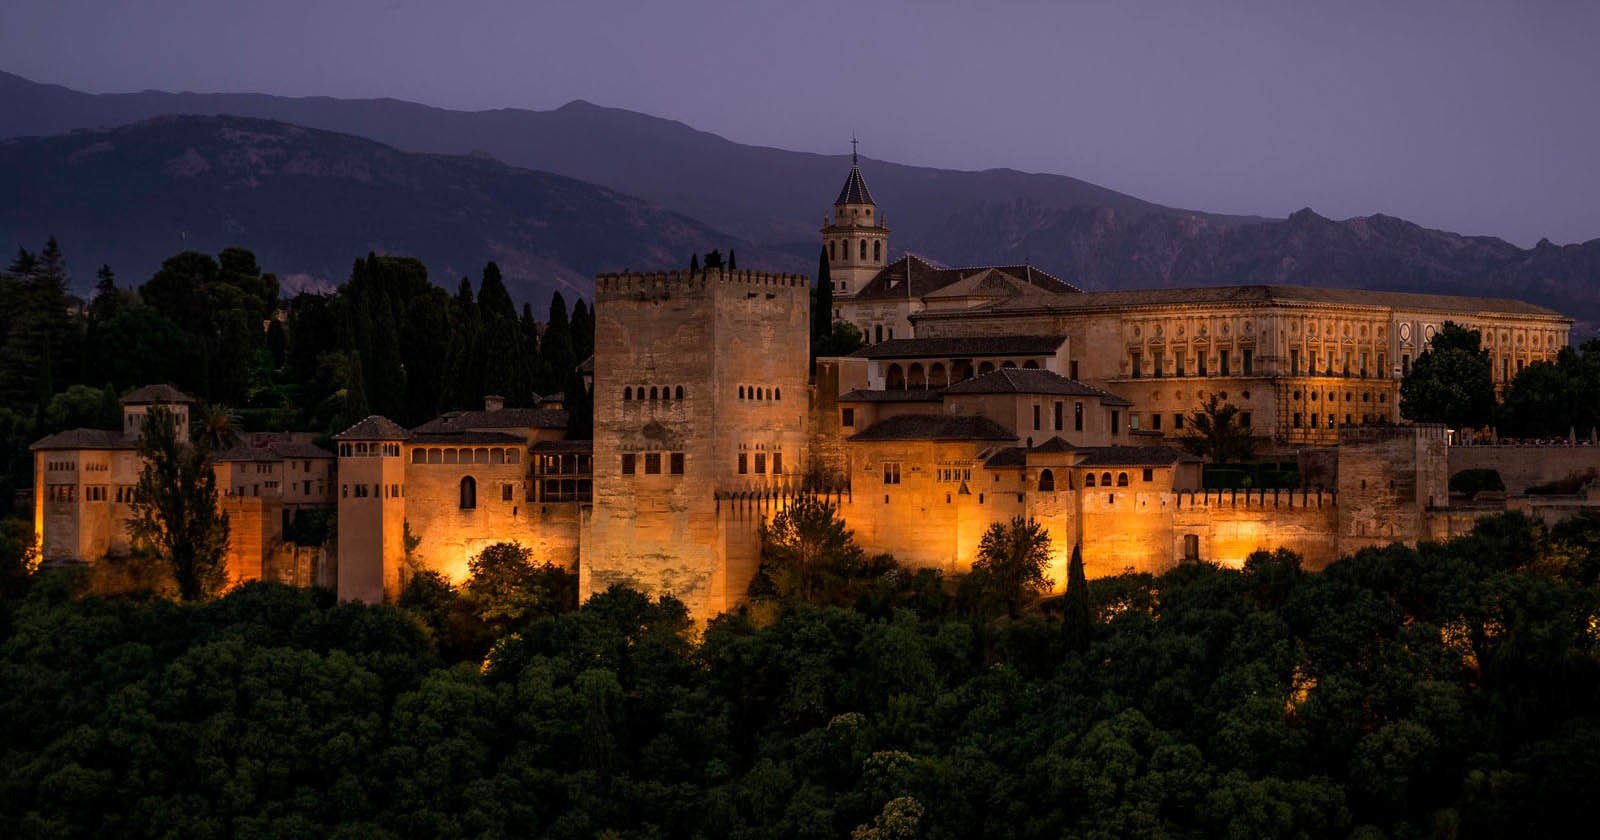  red castle photographer view iconic alhambra spain 